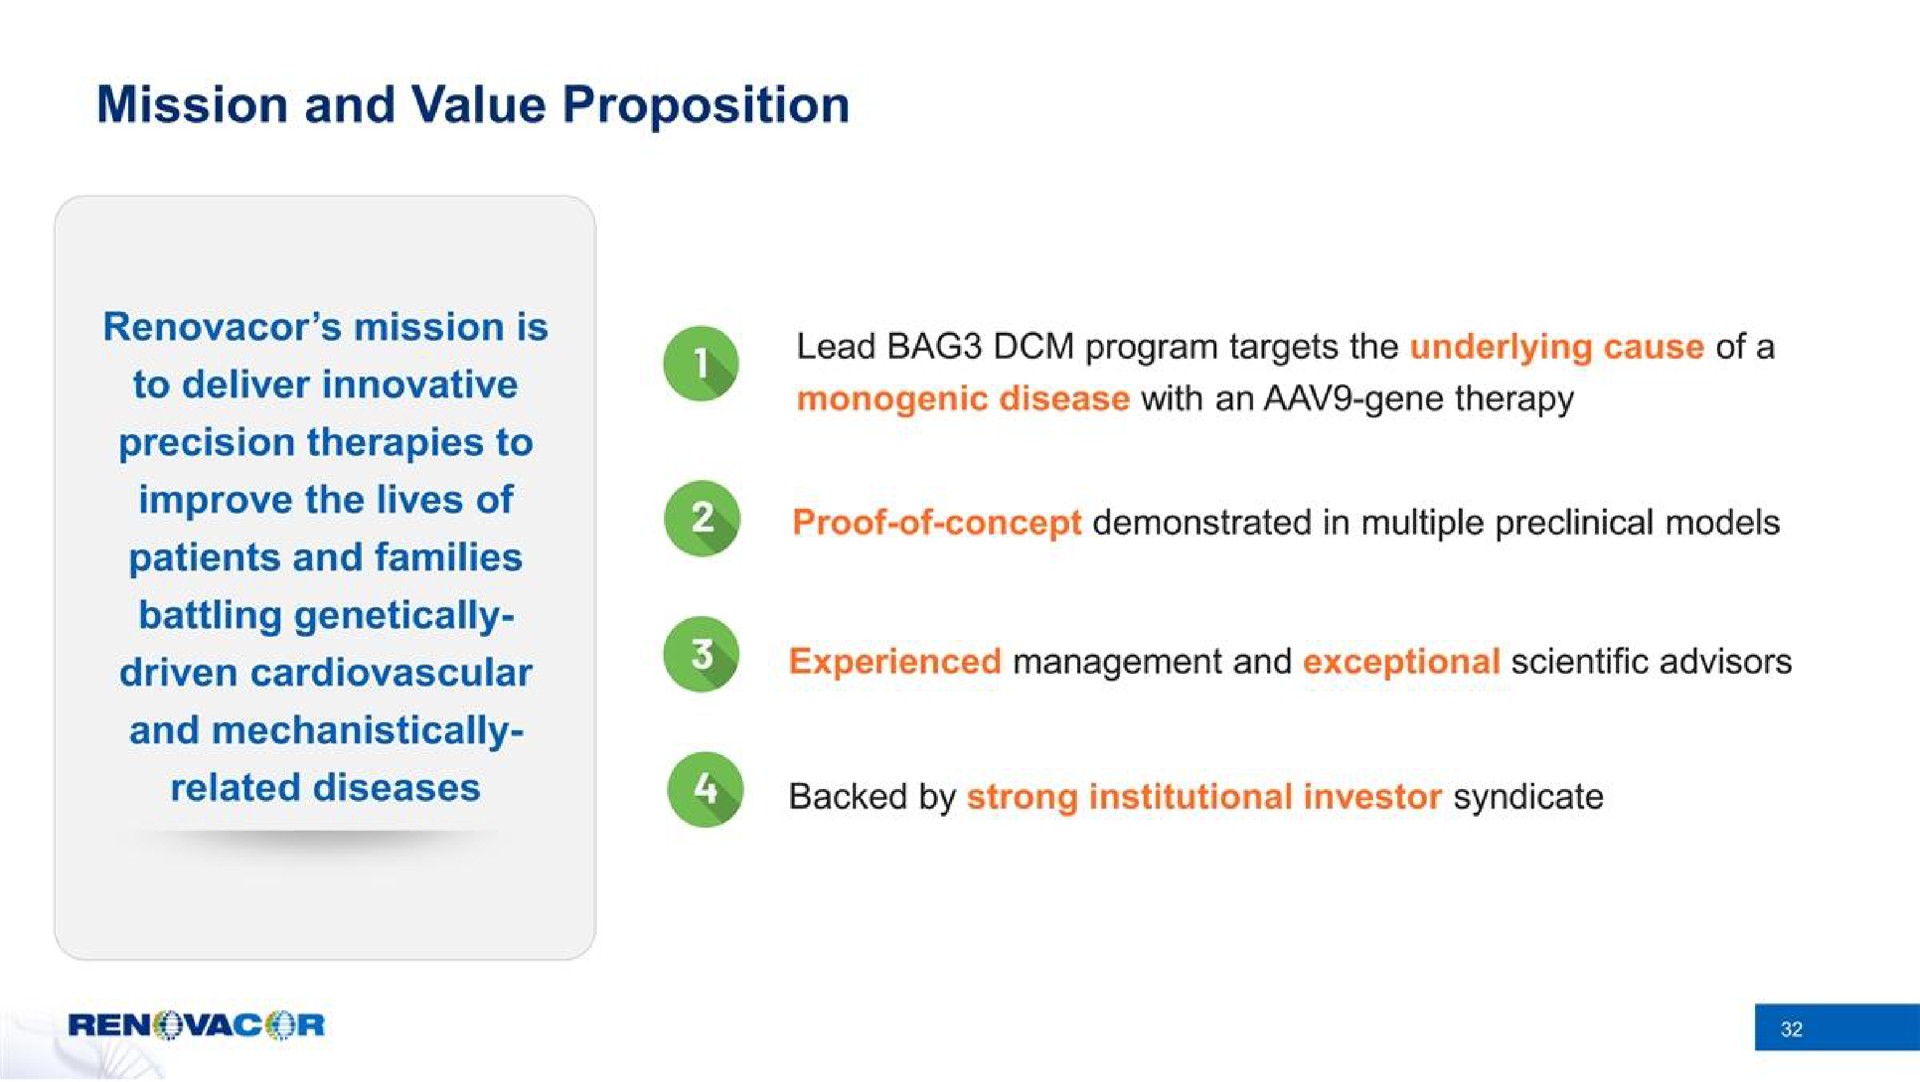 mission and value proposition | Renovacor